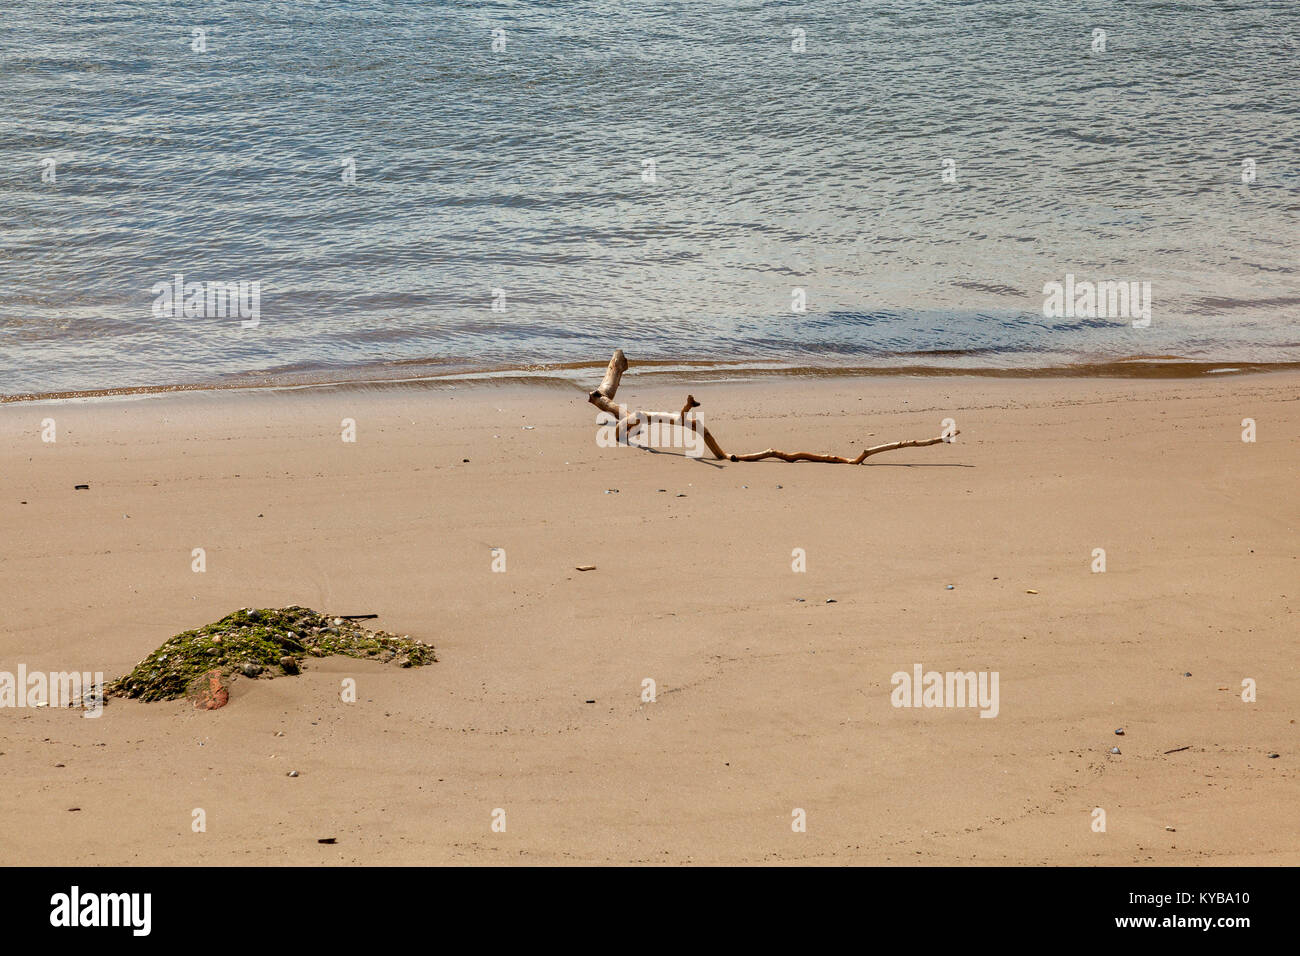 Driftwood makes interesting patterns on the sand at North Shields beach, Tyne and Wear, UK Stock Photo